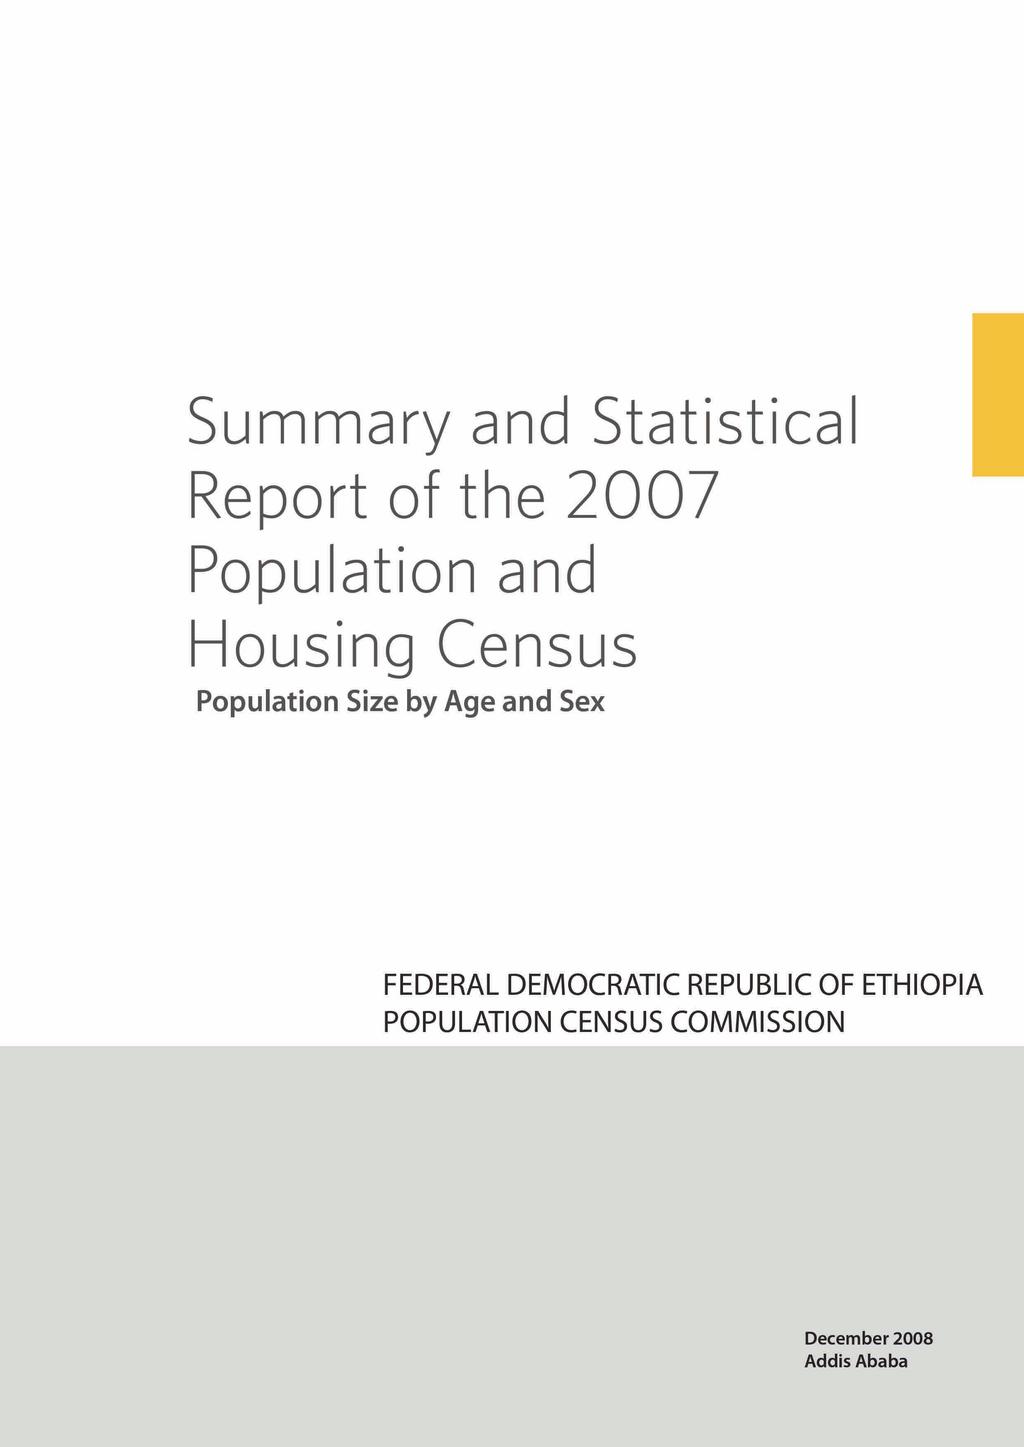 2 Summary and Statistical Report of the 2007 Population and Housing Census